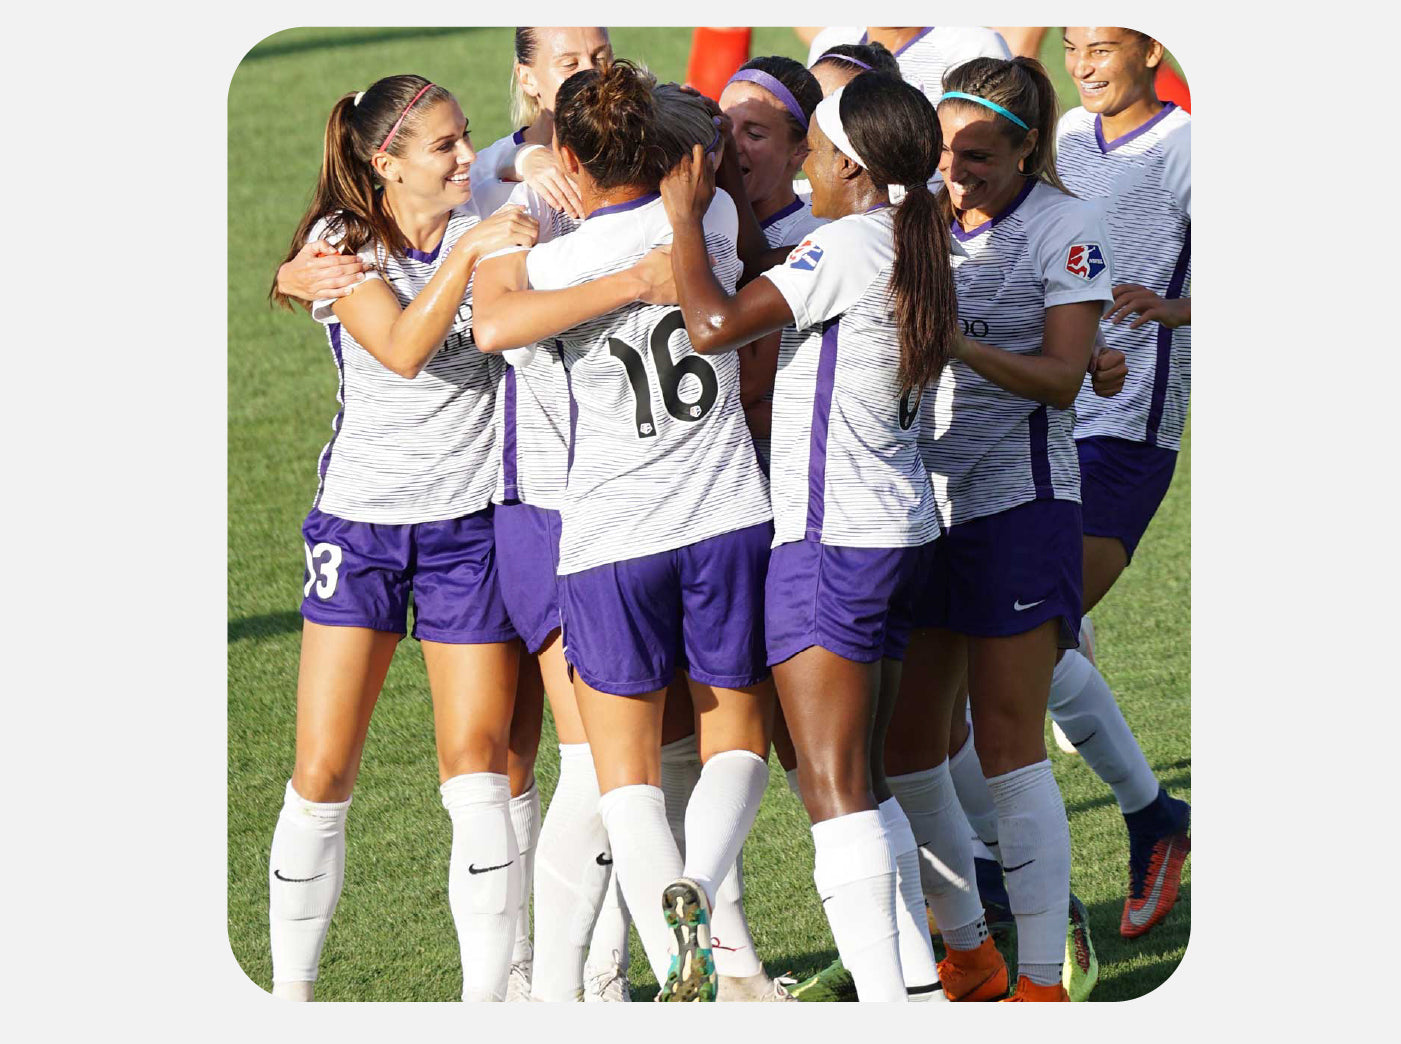 A group of female soccer players in matching white and purple uniforms are joyfully embracing each other on the field in a celebratory huddle. Their expressions are one of happiness and triumph, likely following a successful play or victory in their game. They are wearing white soccer socks and various colored soccer cleats, and the sun is shining down on them, highlighting the camaraderie and athletic spirit of the moment.